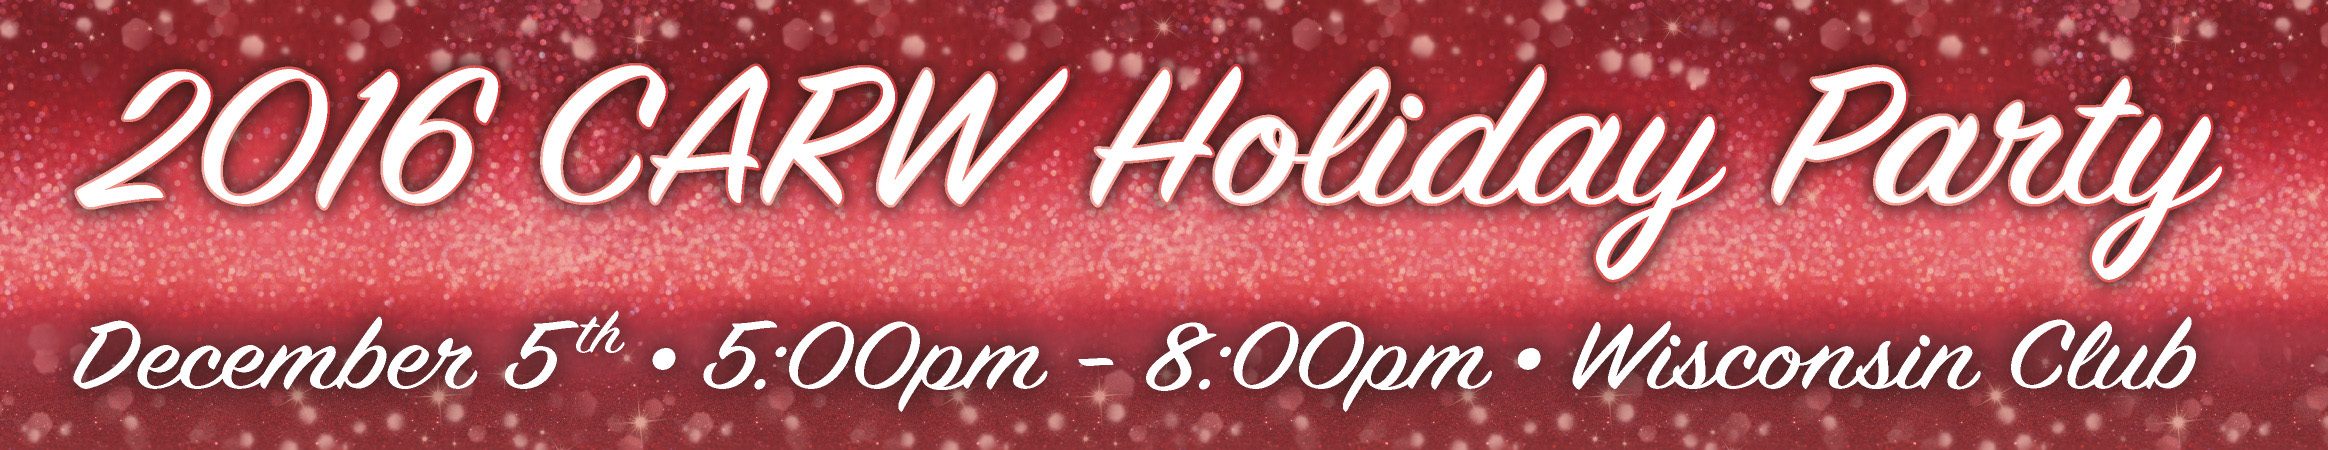 holiday-party-banner